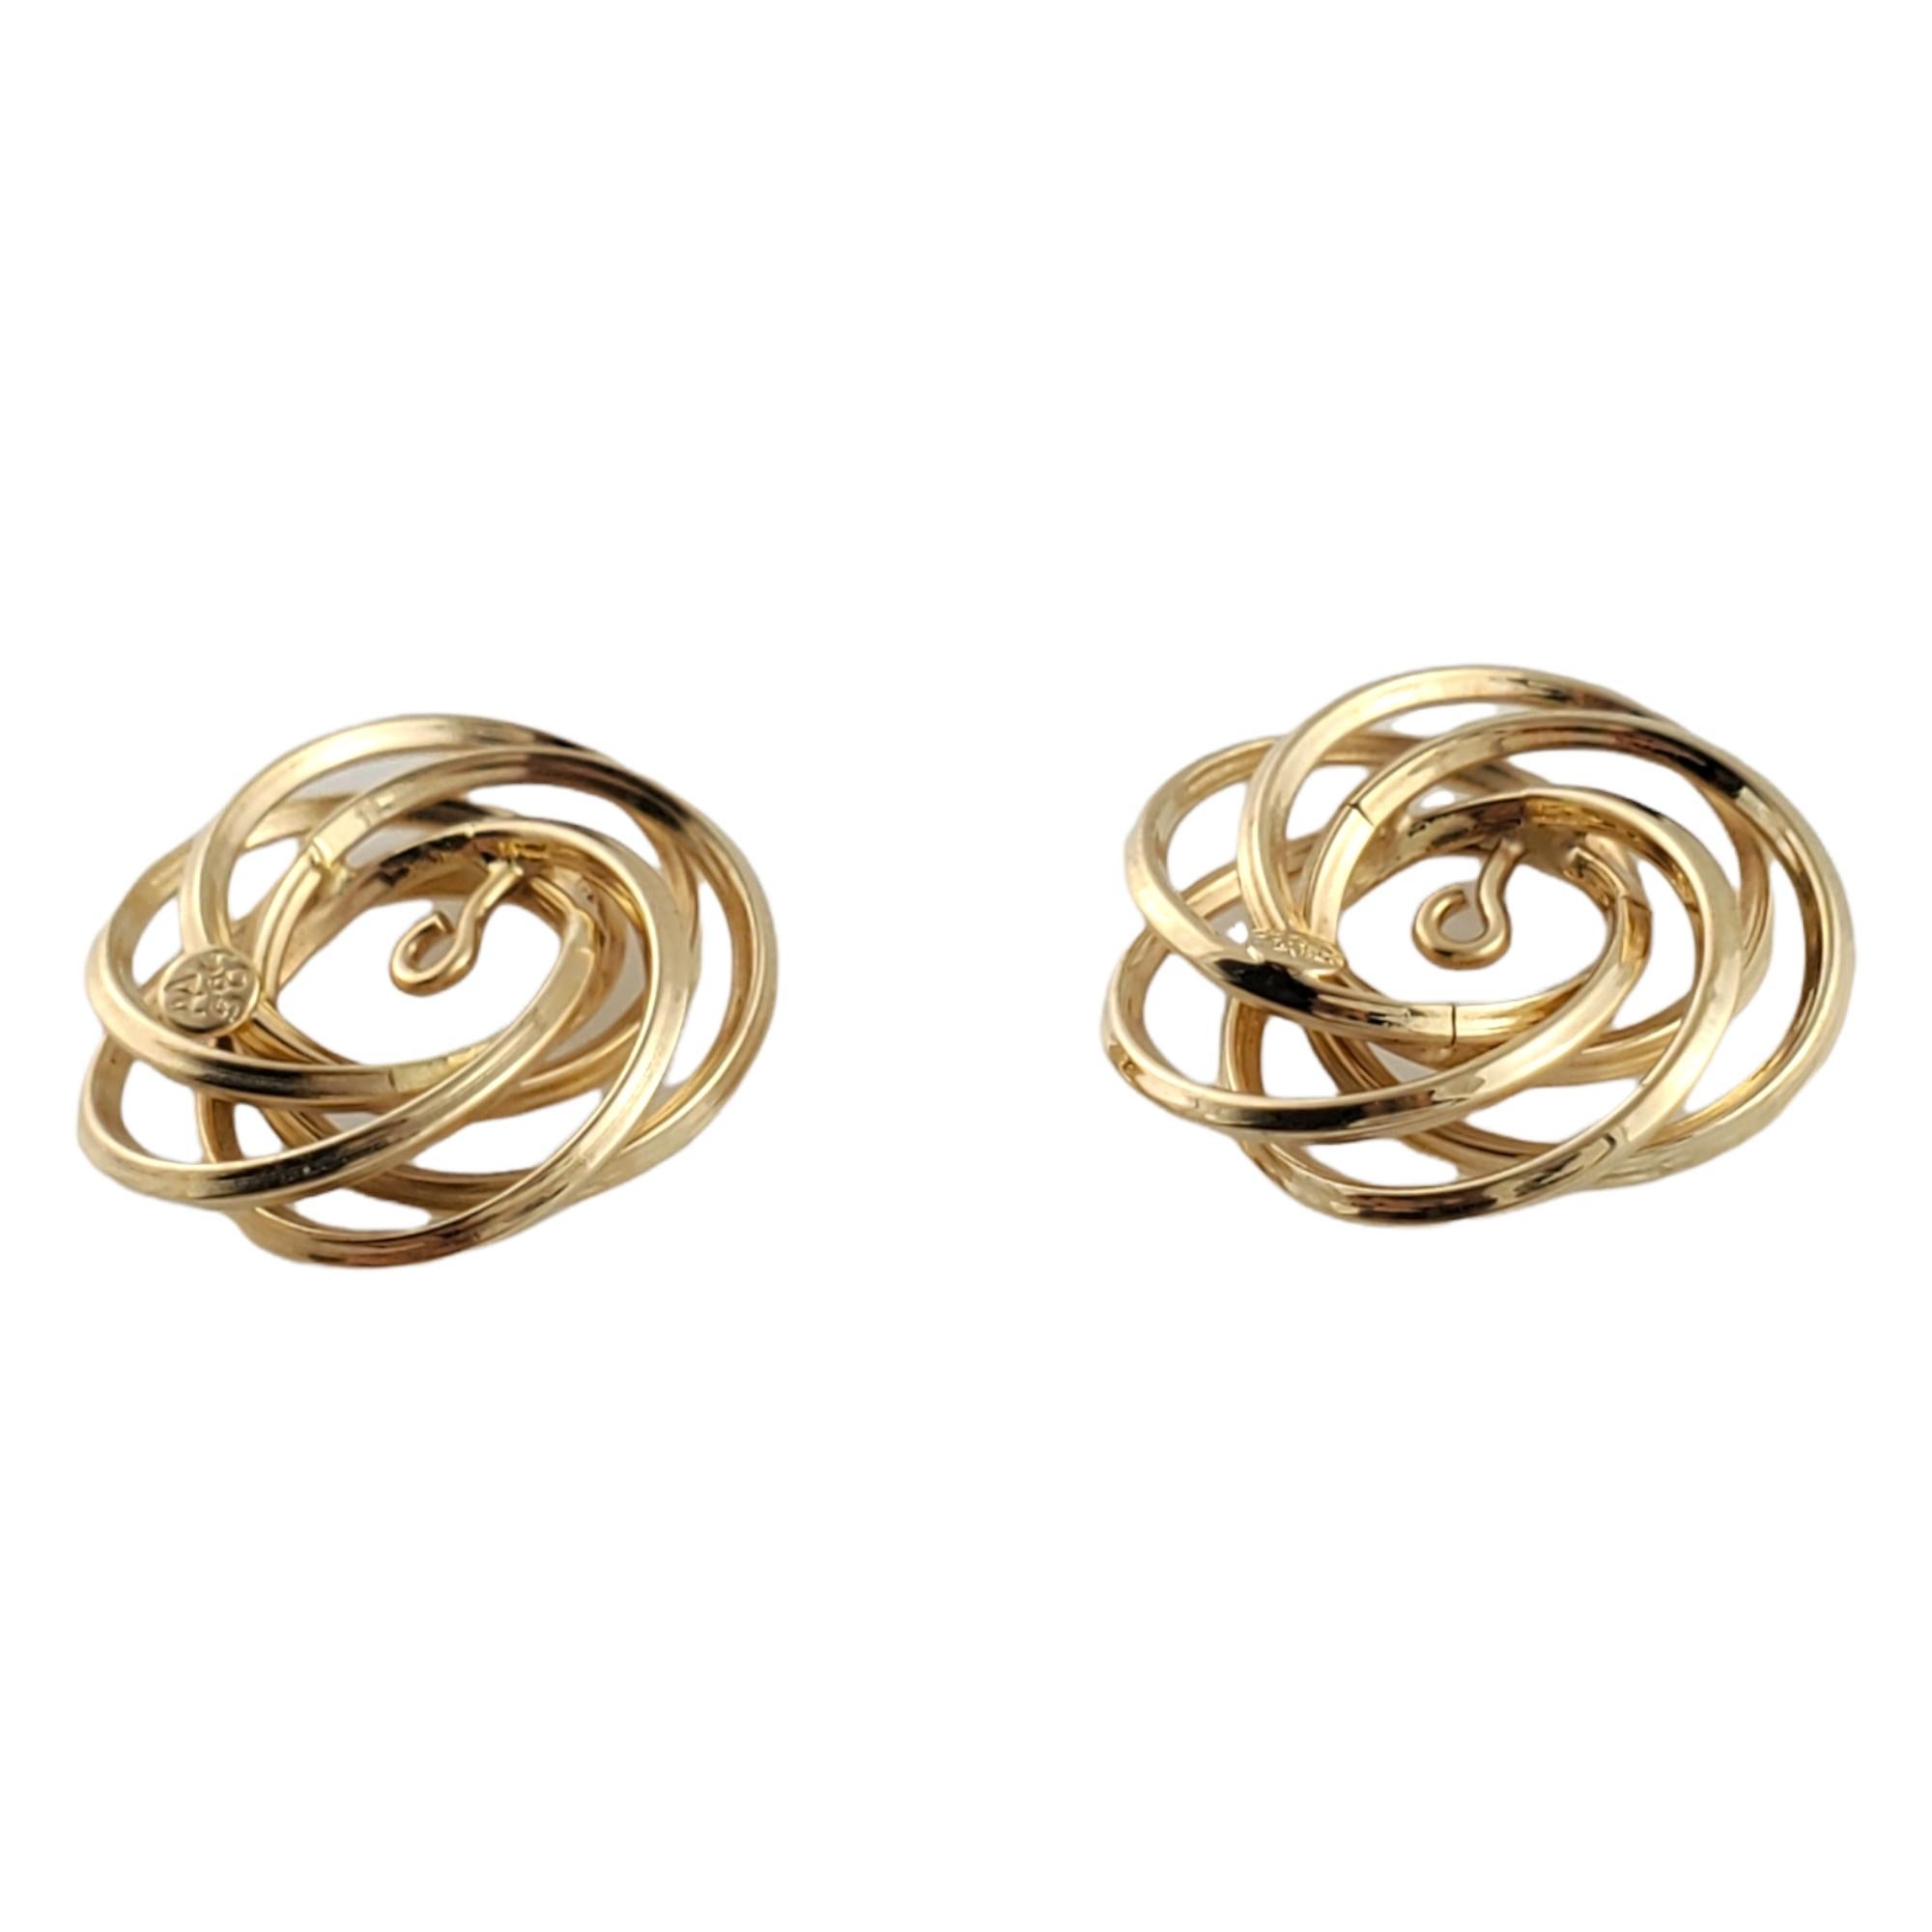 Vintage 14K Yellow Gold Swirl Earring Jackets

Beautiful pair of 14K yellow gold earring jackets designed to perfection!

Size: 17.5 mm diameter

Weight: 2.1 g/ 1.3 dwt

Hallmark: AA 585

*Pearl studs not included*

Very good condition,